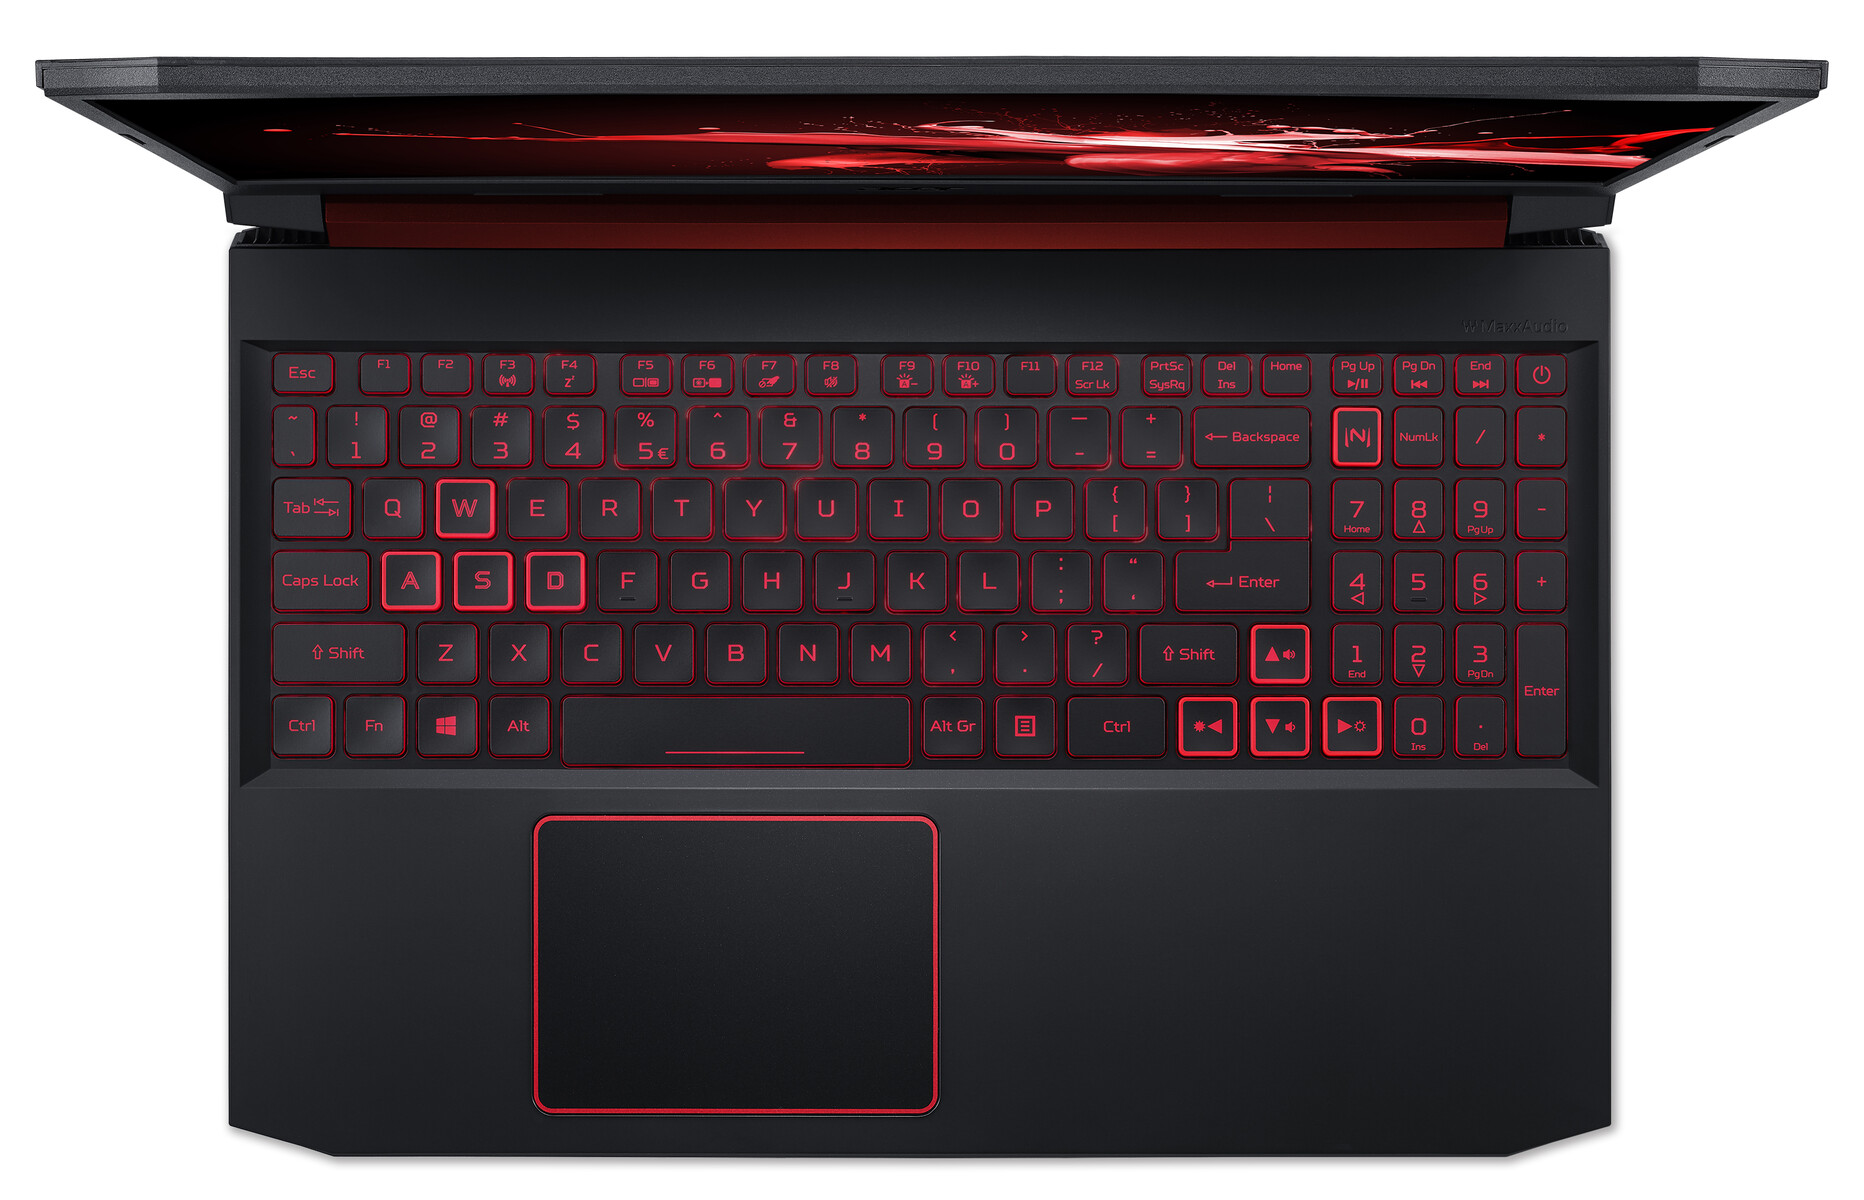 Acer Nitro 5 will be one of the cheapest laptops with Intel 9th gen CPU and GeForce GTX 16 GPU